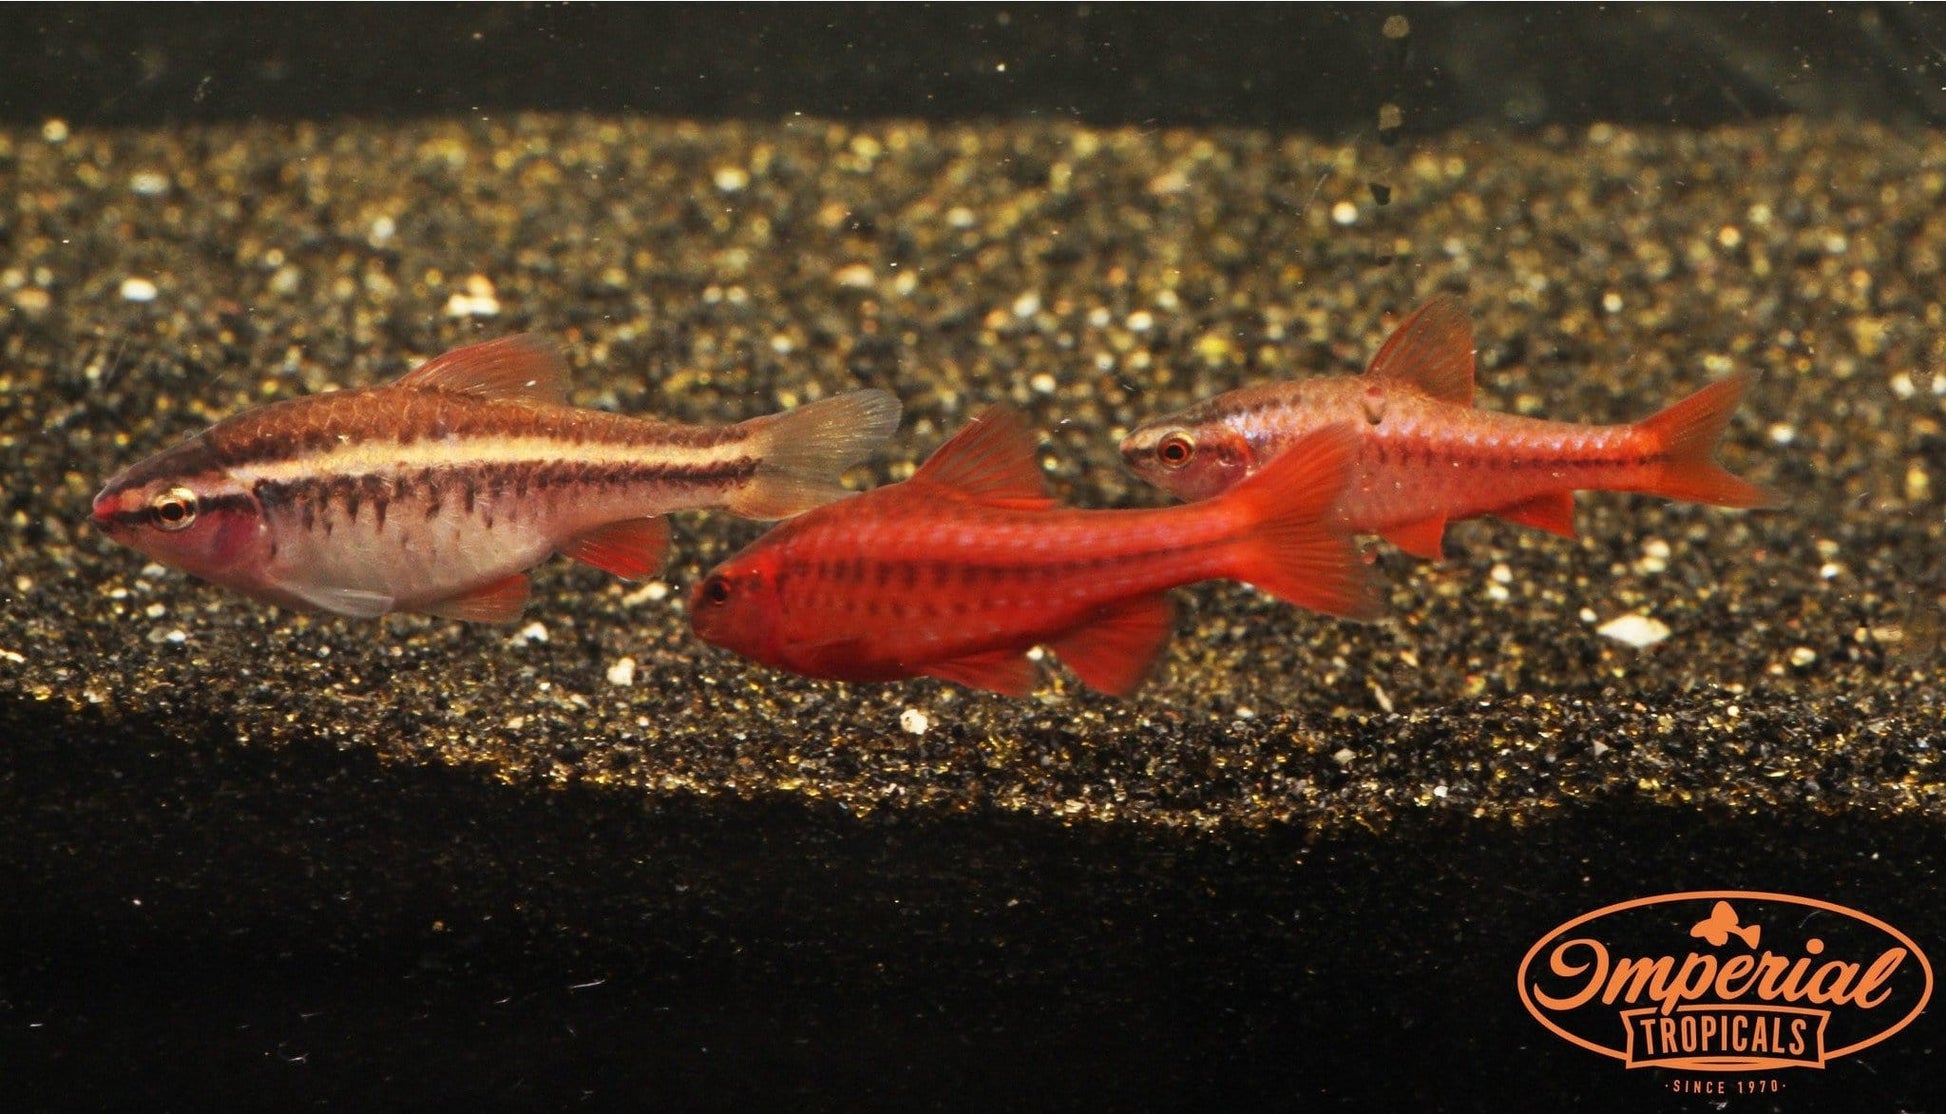 Cherry Barb (Puntius titteya) - Imperial Tropicals